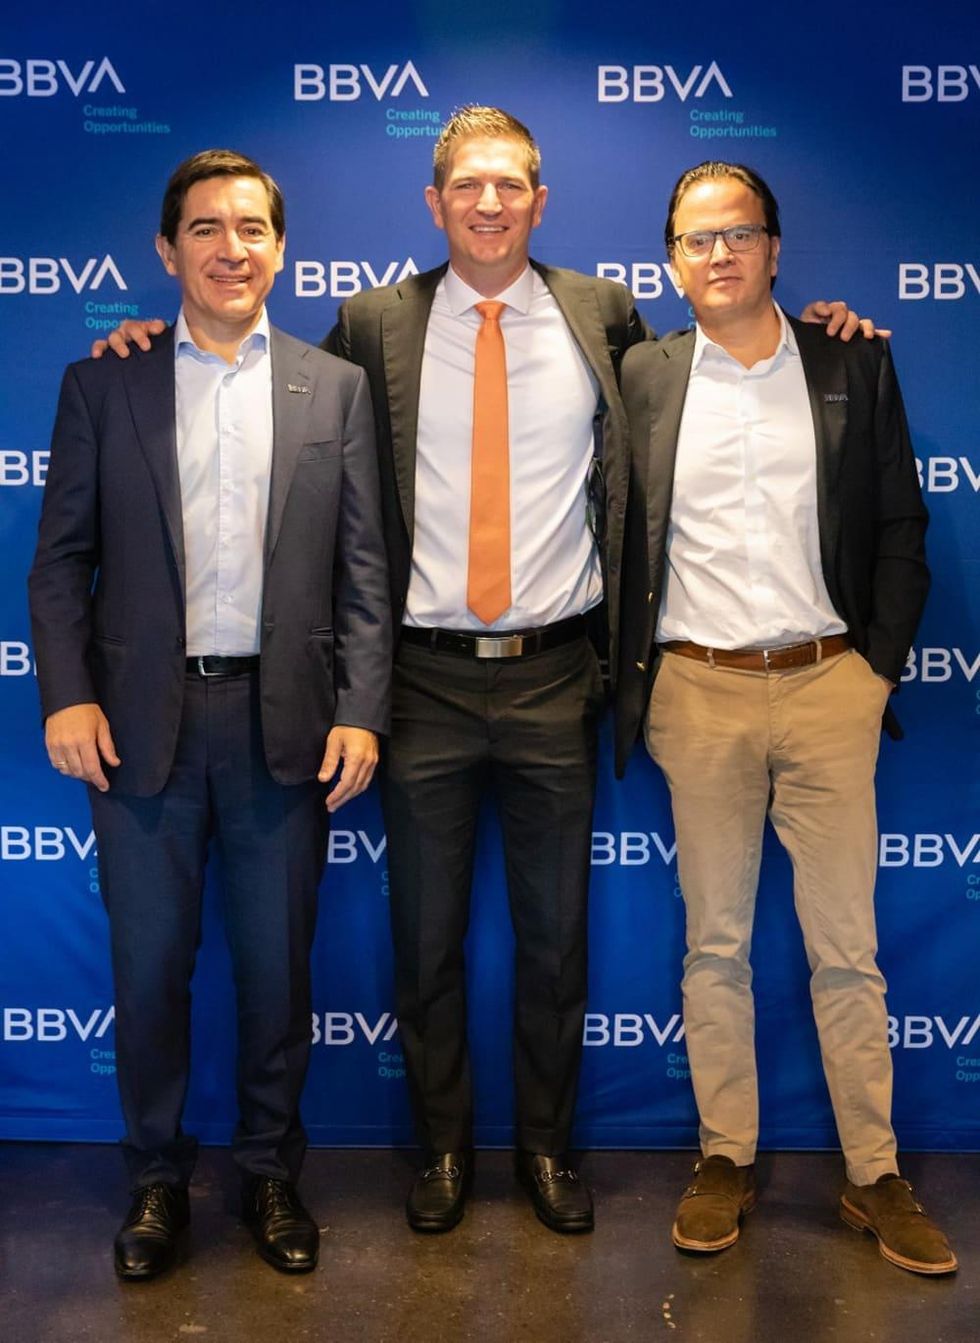 BBVA Group Executive Chairman Carlos Torres Vila (left), Dynamo former player Bobby Boswell (center), and BBVA USA President and CEO Javier Rodriguez Soler (right) at the BBVA Stadium press conference in Houston